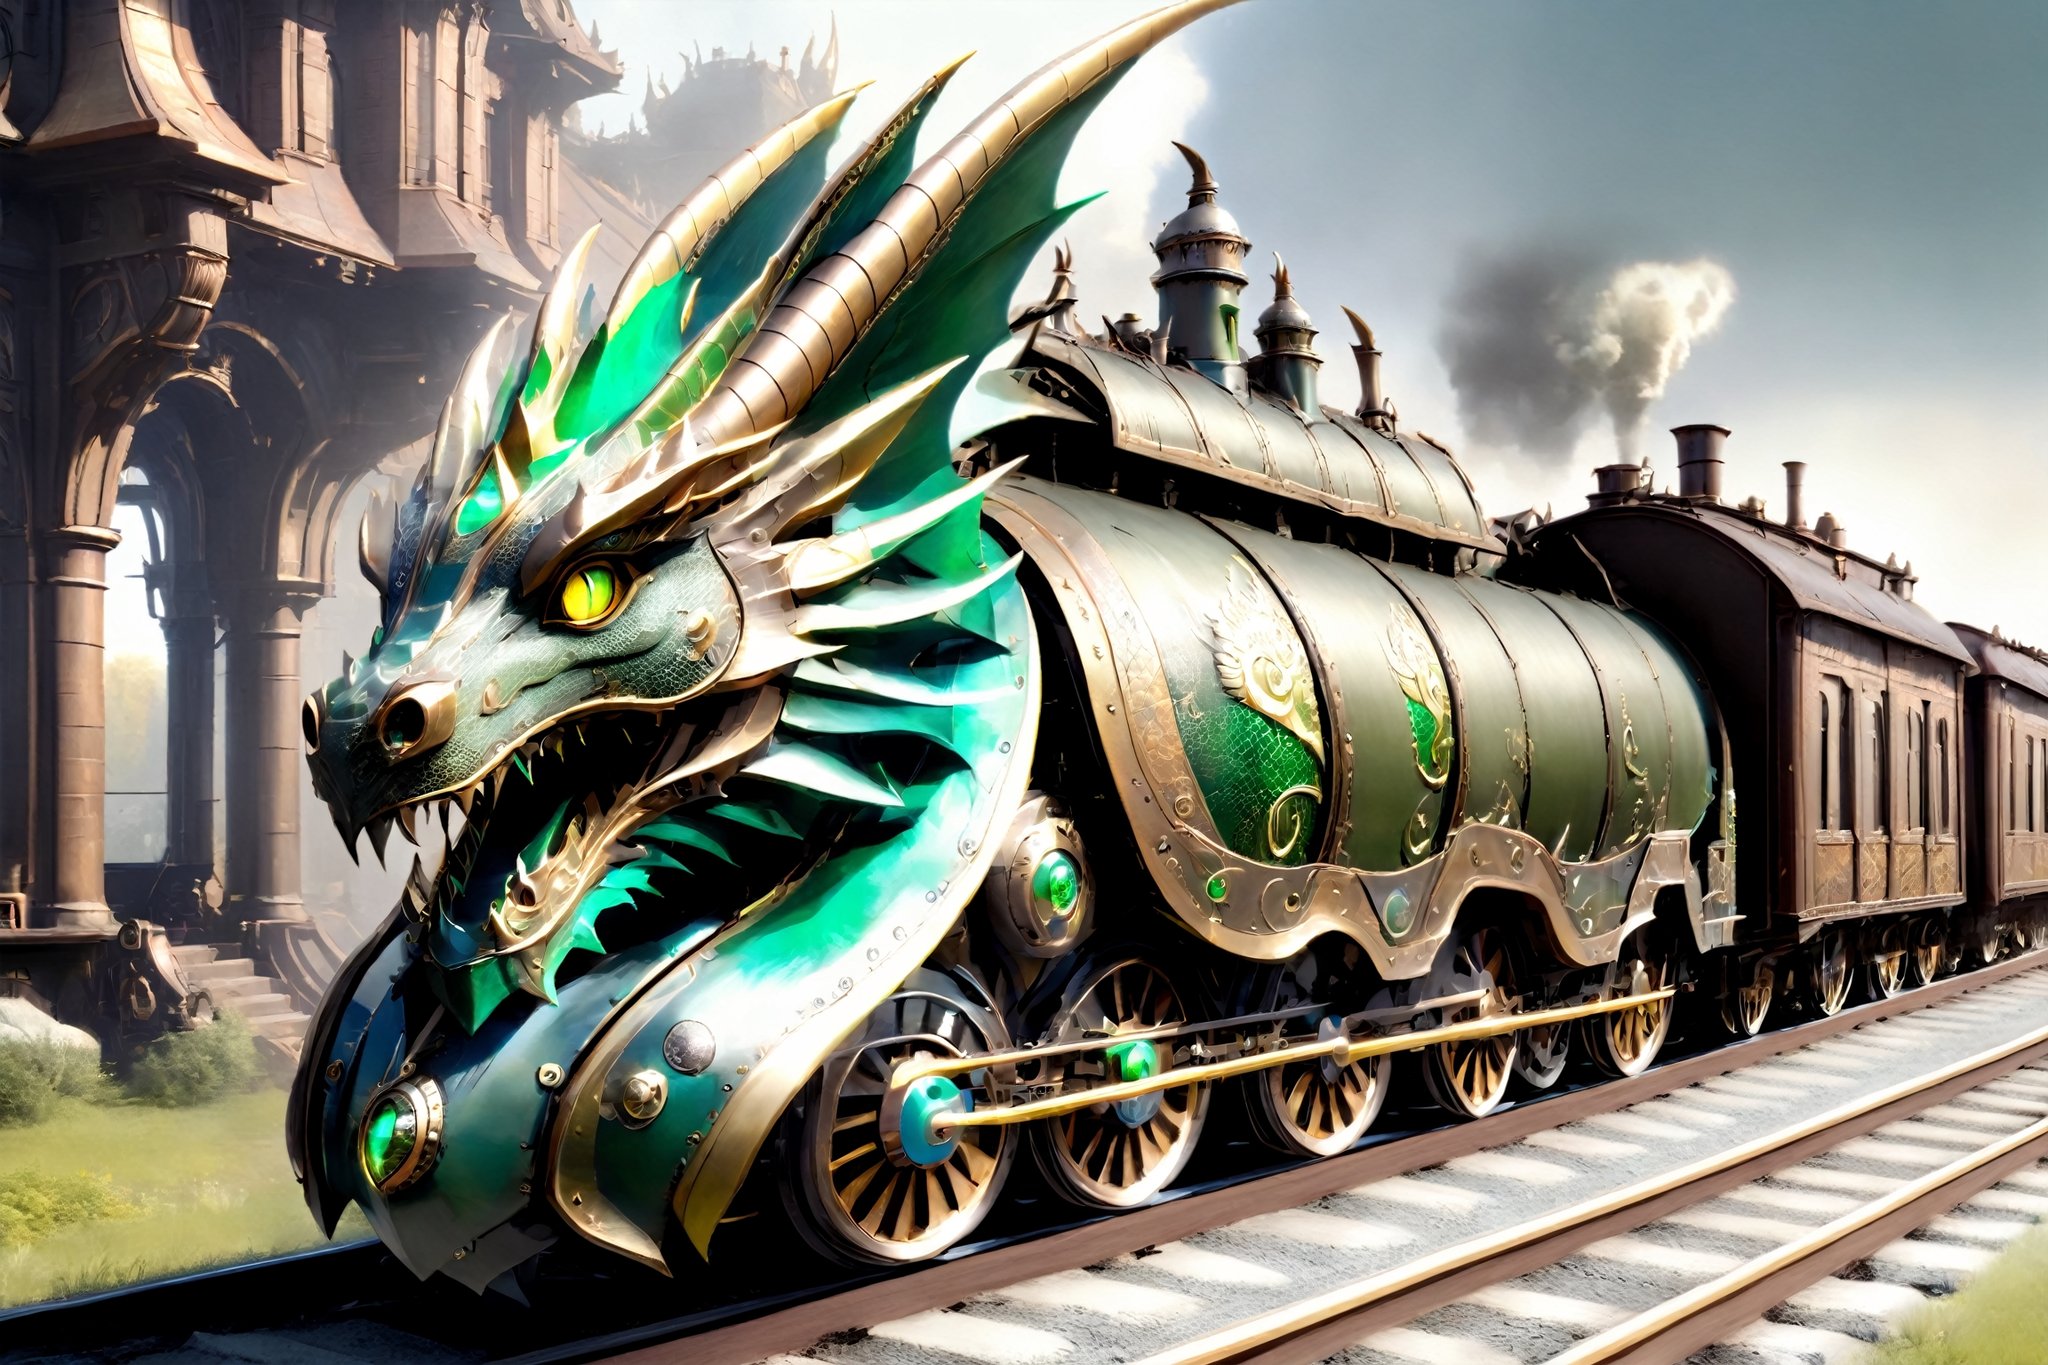 A formidable armored train inspired by the essence of dragons. Its exterior is adorned with intricate dragon motifs, intertwining with the steel structure like mythical guardians. The train's scales gleam with metallic hues, resembling the resilience of dragon hide. Towering turrets mimic draconic horns, emphasizing both strength and elegance. As the train thunders down the tracks, it carries an air of mythical power, a modern marvel fused with ancient legend.,dragon train,DonM3lv3sXL